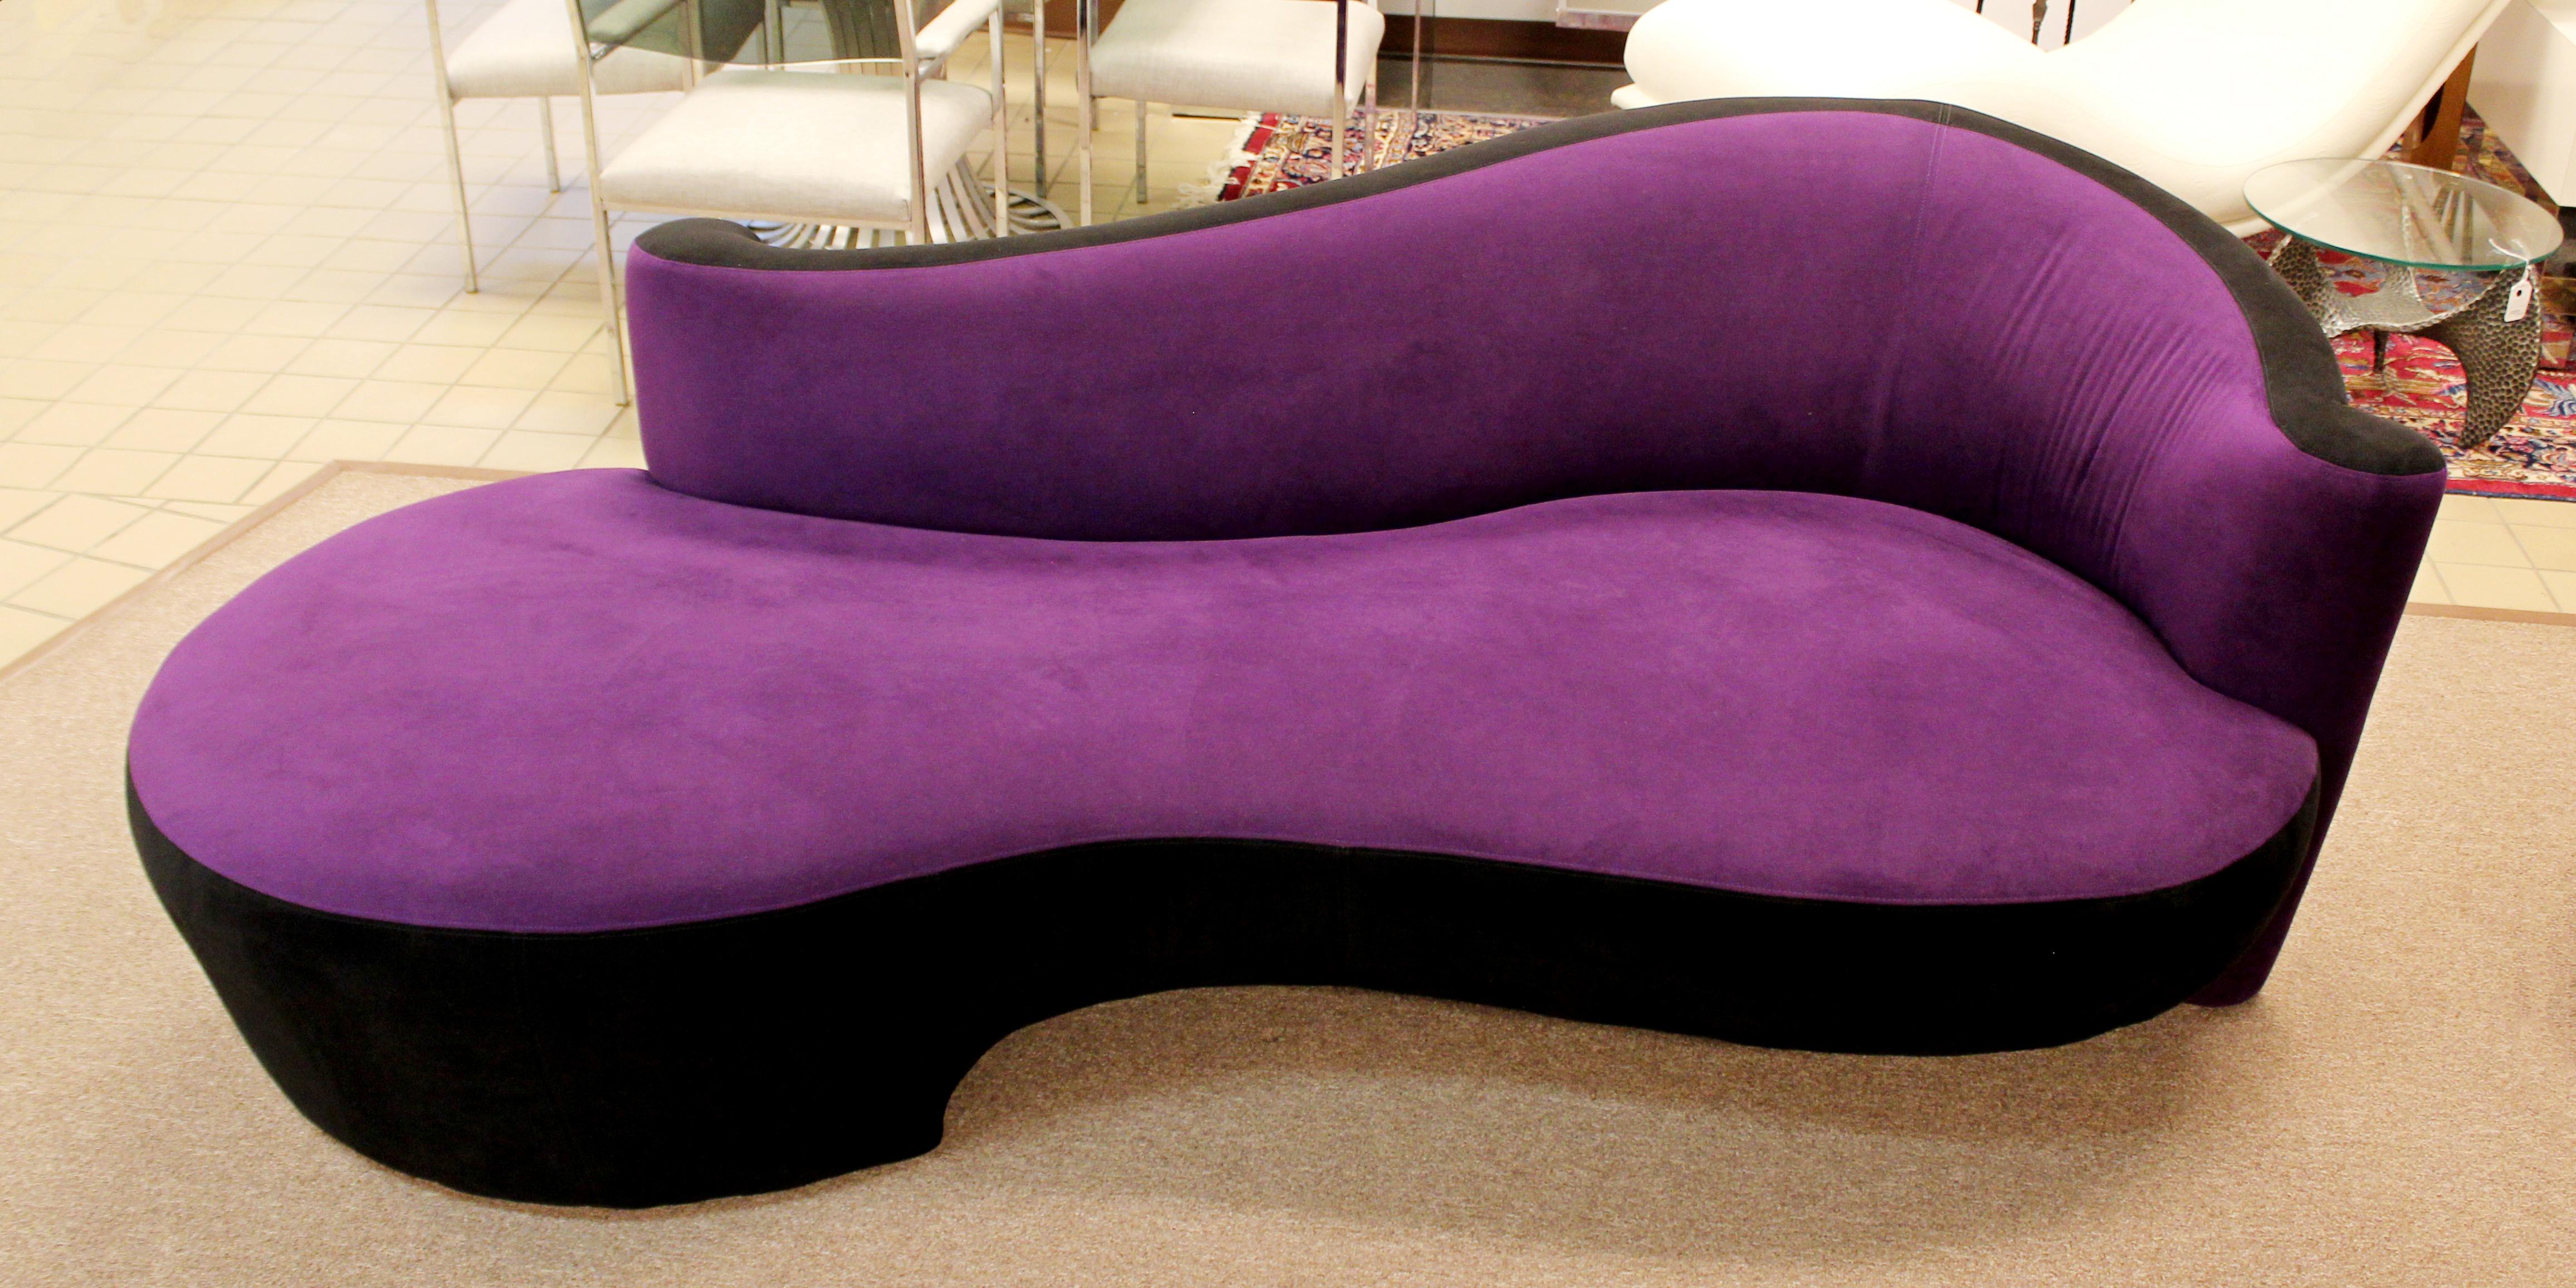 For your consideration is an outstanding pair of purple micro- suede, serpentine sofas, with a matching ottoman, by Weiman, circa the 1980s. Though the fabric looks pinky in some of the pictures, this is due to lighting issues, in life, it is a deep